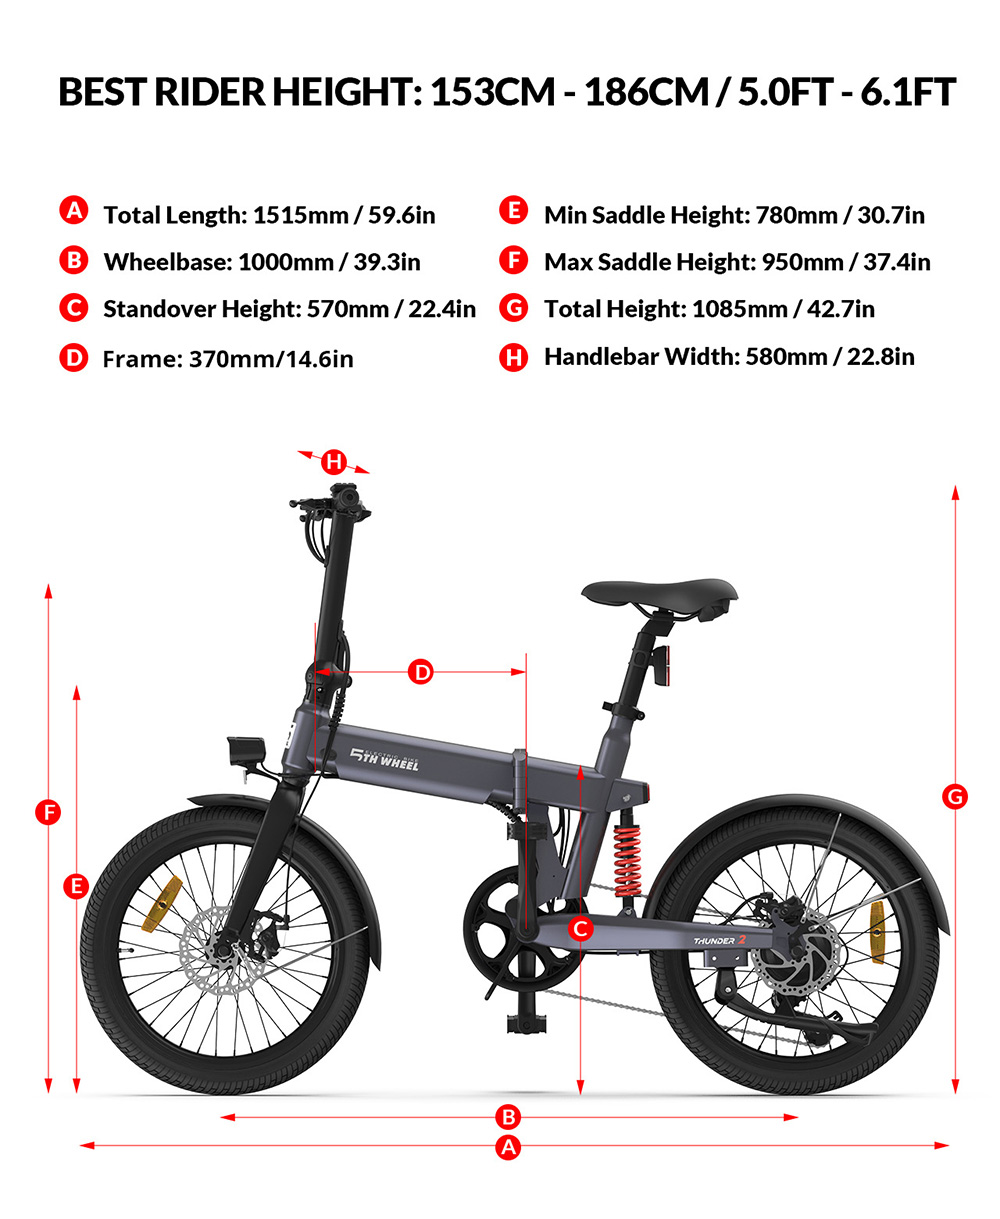 5TH WHEEL Thunder 2 Flodablle Electric Bike, 250W Motor, 36V 10.4Ah Battery, 20-inch Rubber Tires, 25km/h Max Speed